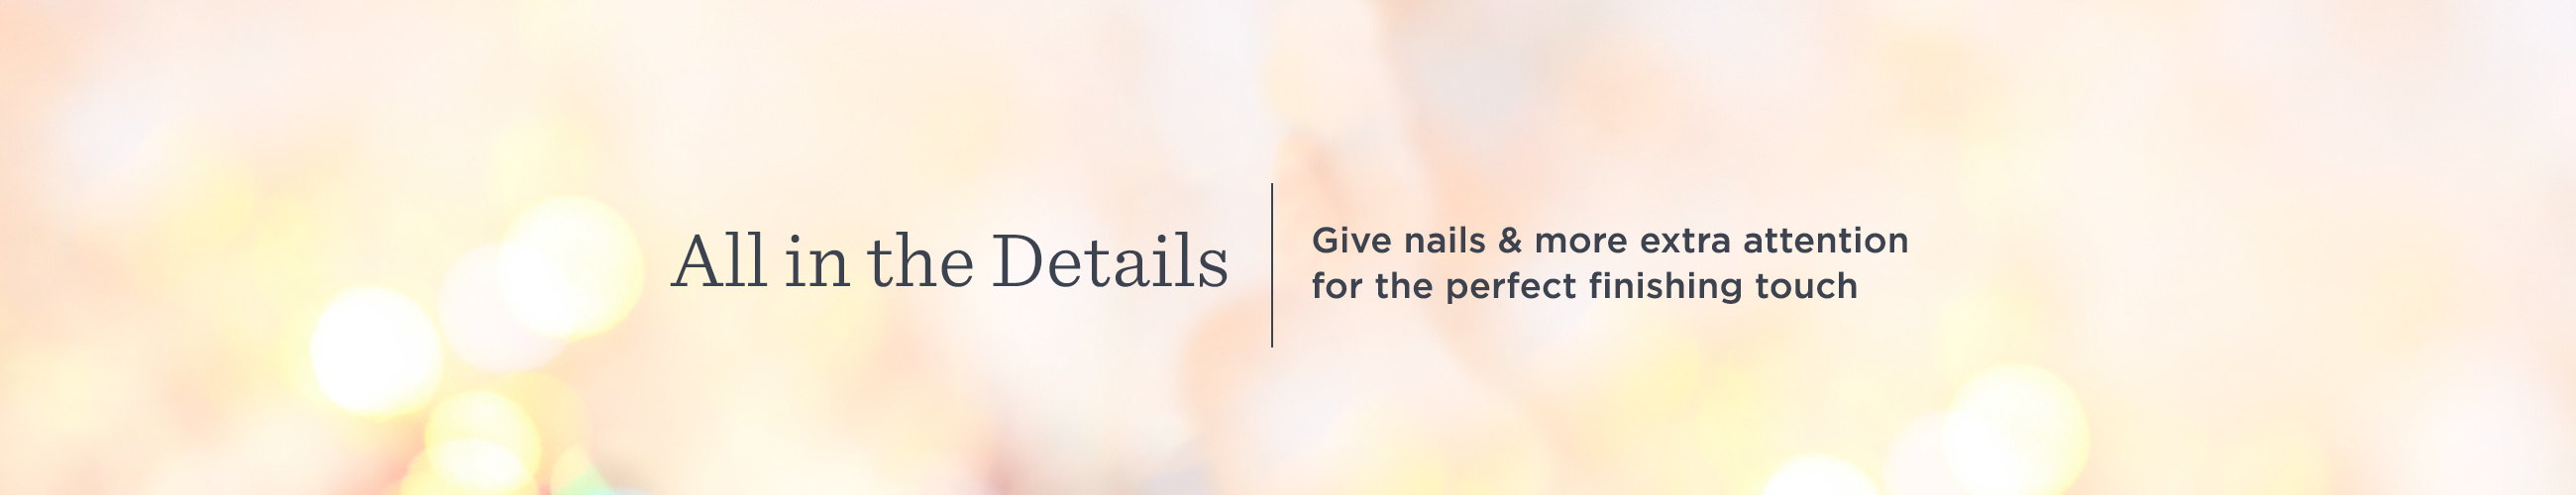 All in the Details. Give nails & more extra attention for the perfect finishing touch